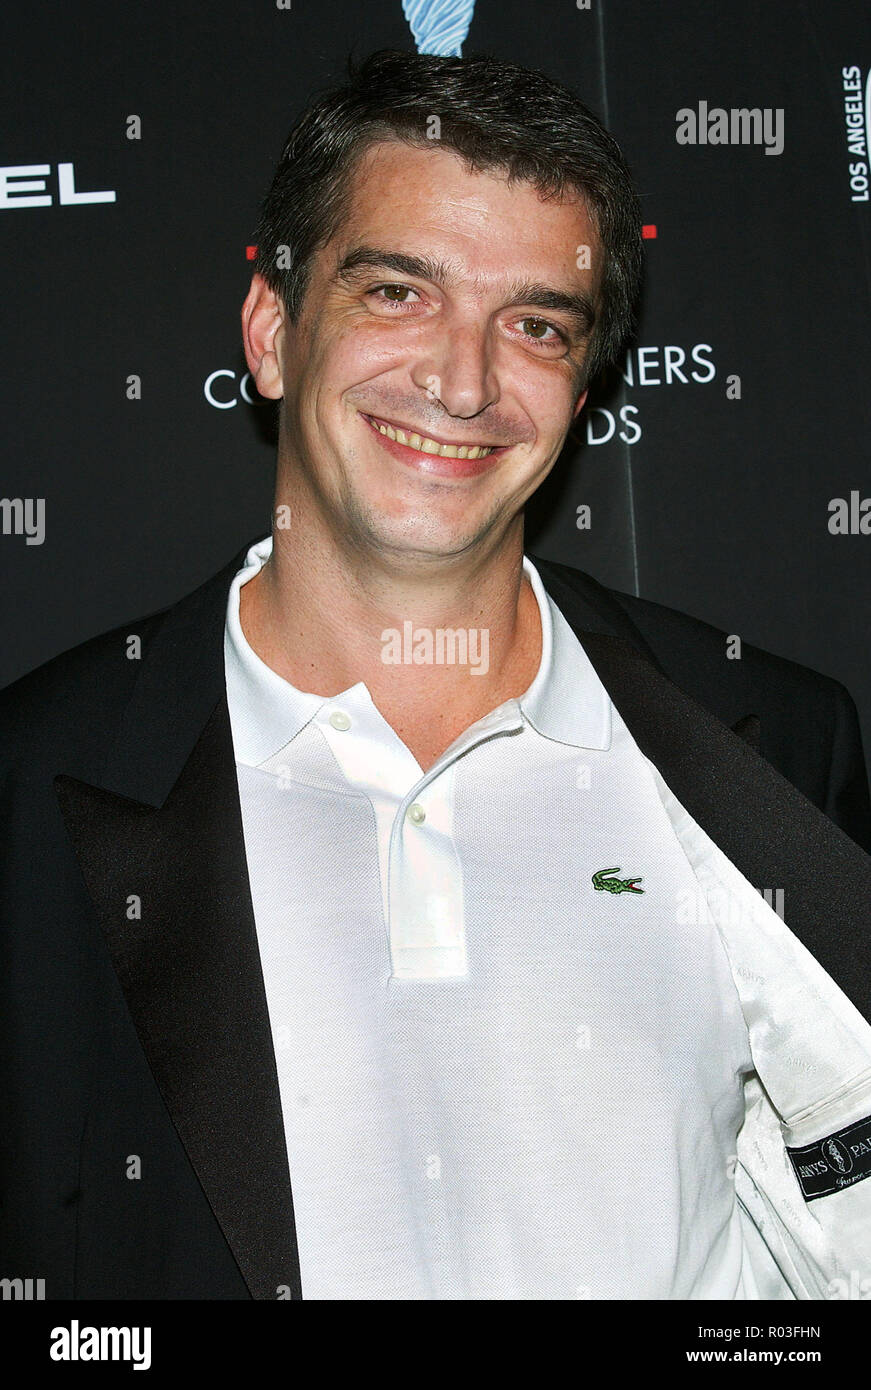 Philippe Lacoste arriving at the 7th Annual Costume Designers Guild Awards  at the Beverly Hilton Hotel in Los Angeles. february 19, 2005.  LascostePhilippe135 Red Carpet Event, Vertical, USA, Film Industry,  Celebrities, Photography,